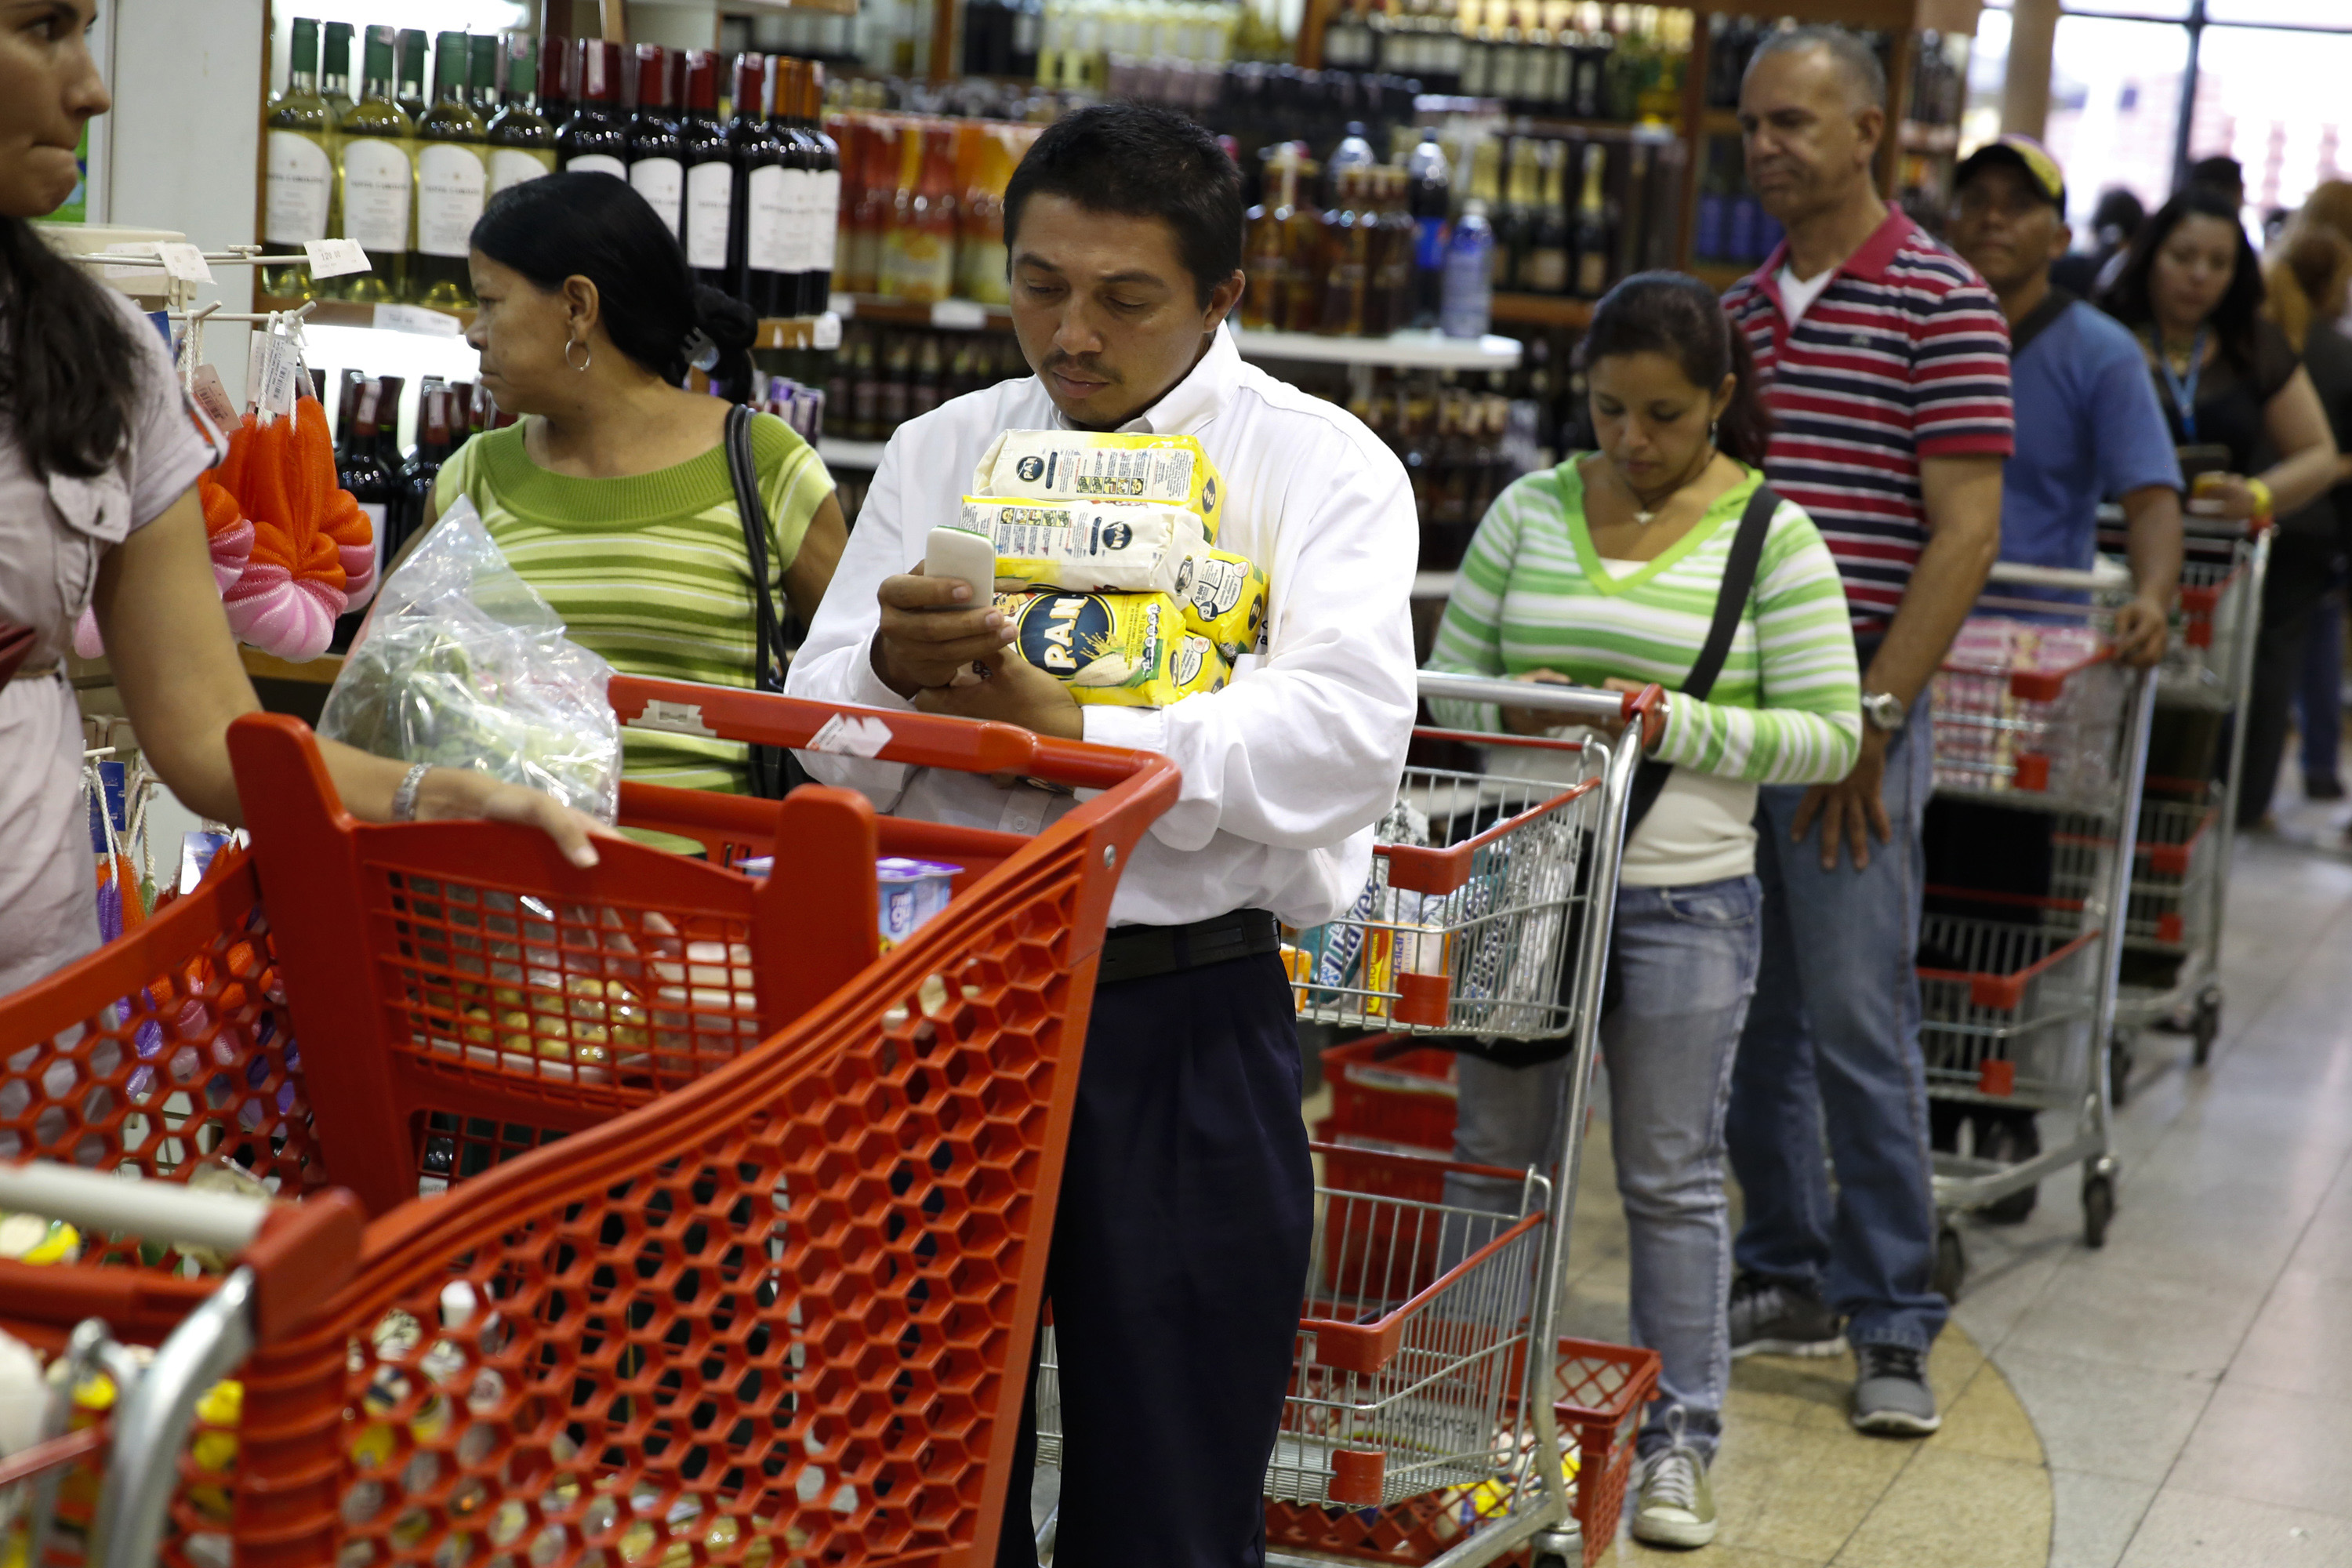 People stand at the checkout line at a supermarket in Caracas